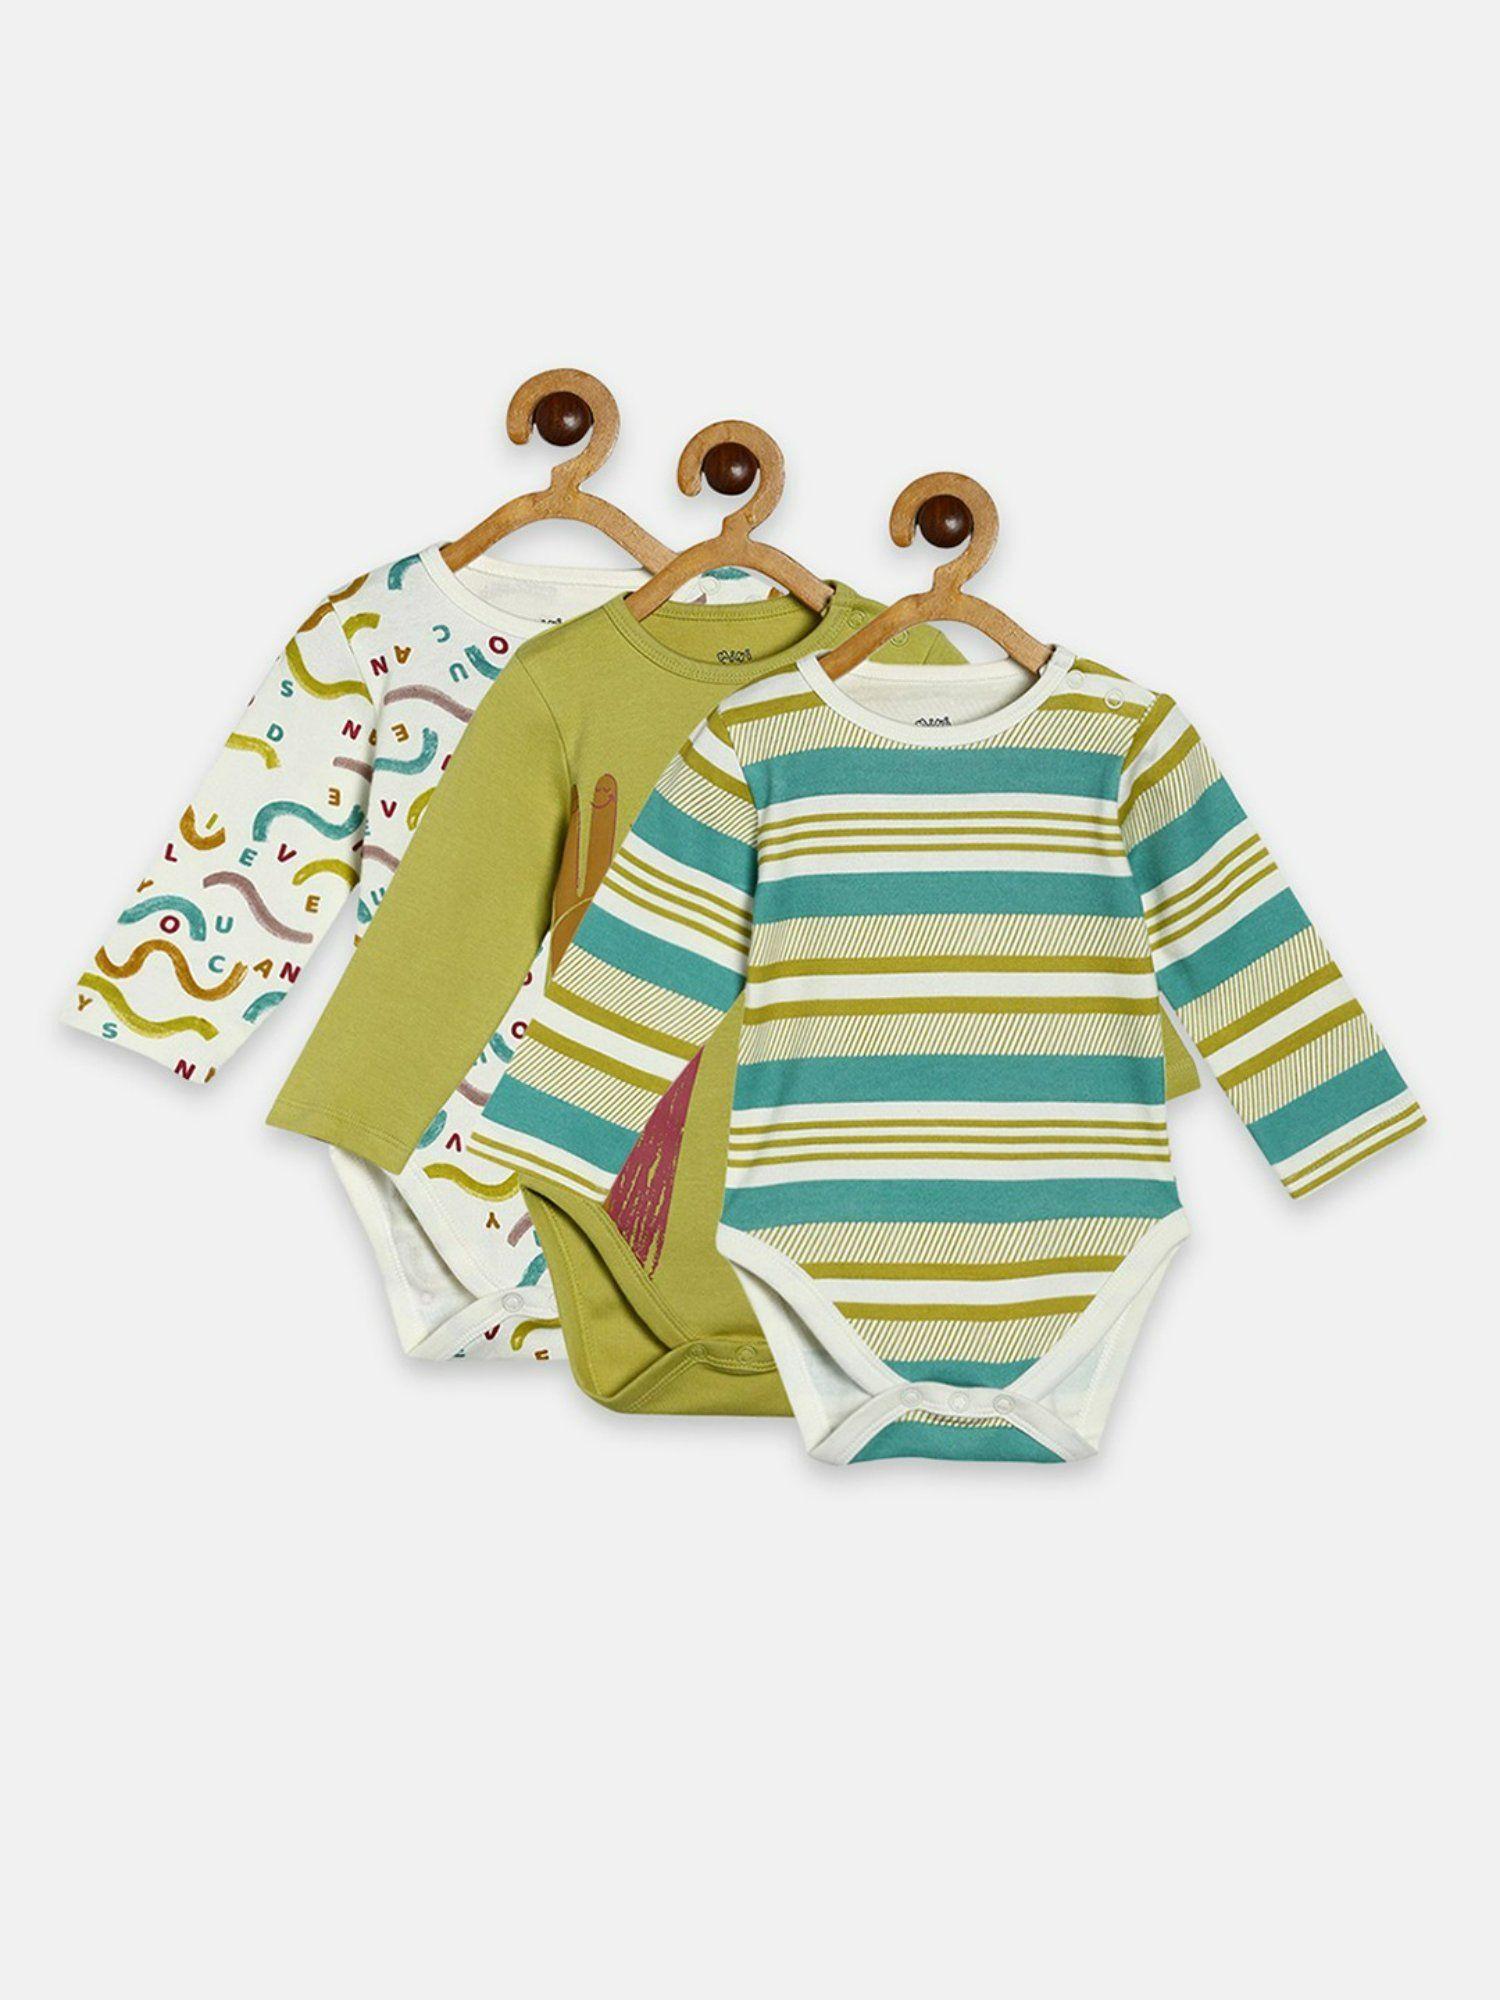 boys-multi-color-bodysuits-(pack-of-3)